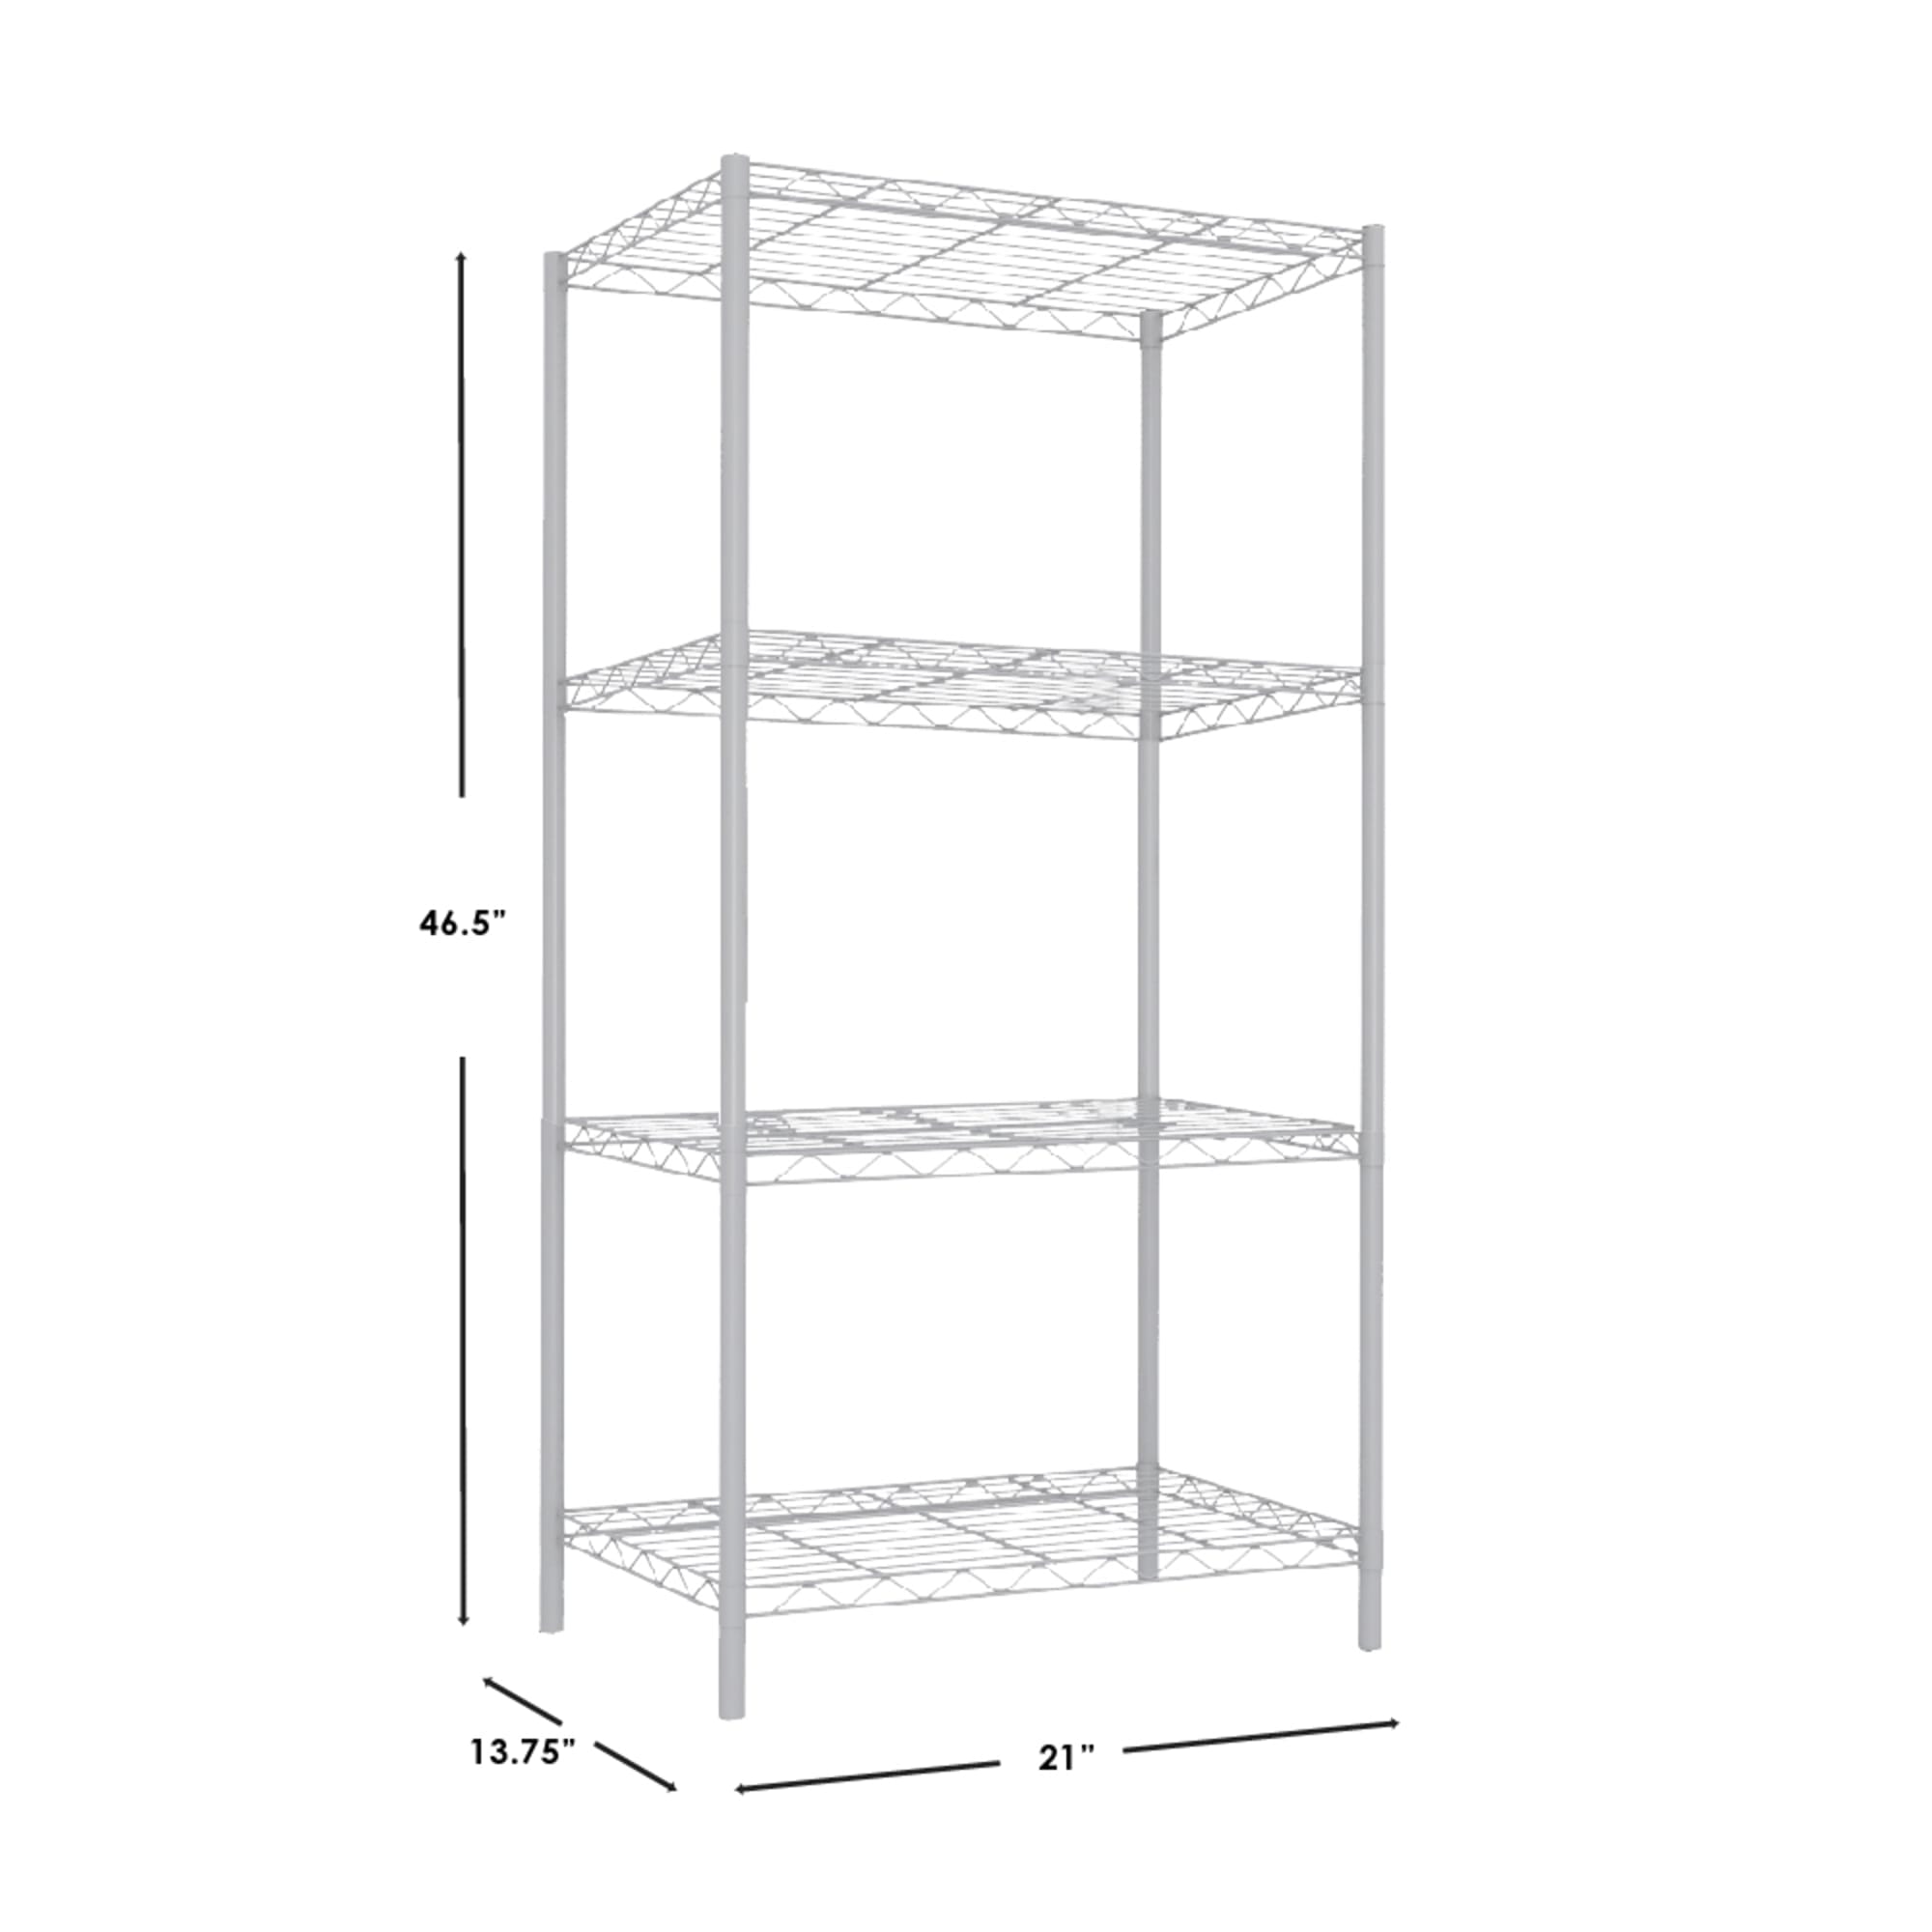 Home Basics 4 Tier Metal Wire Shelf, White $40.00 EACH, CASE PACK OF 4